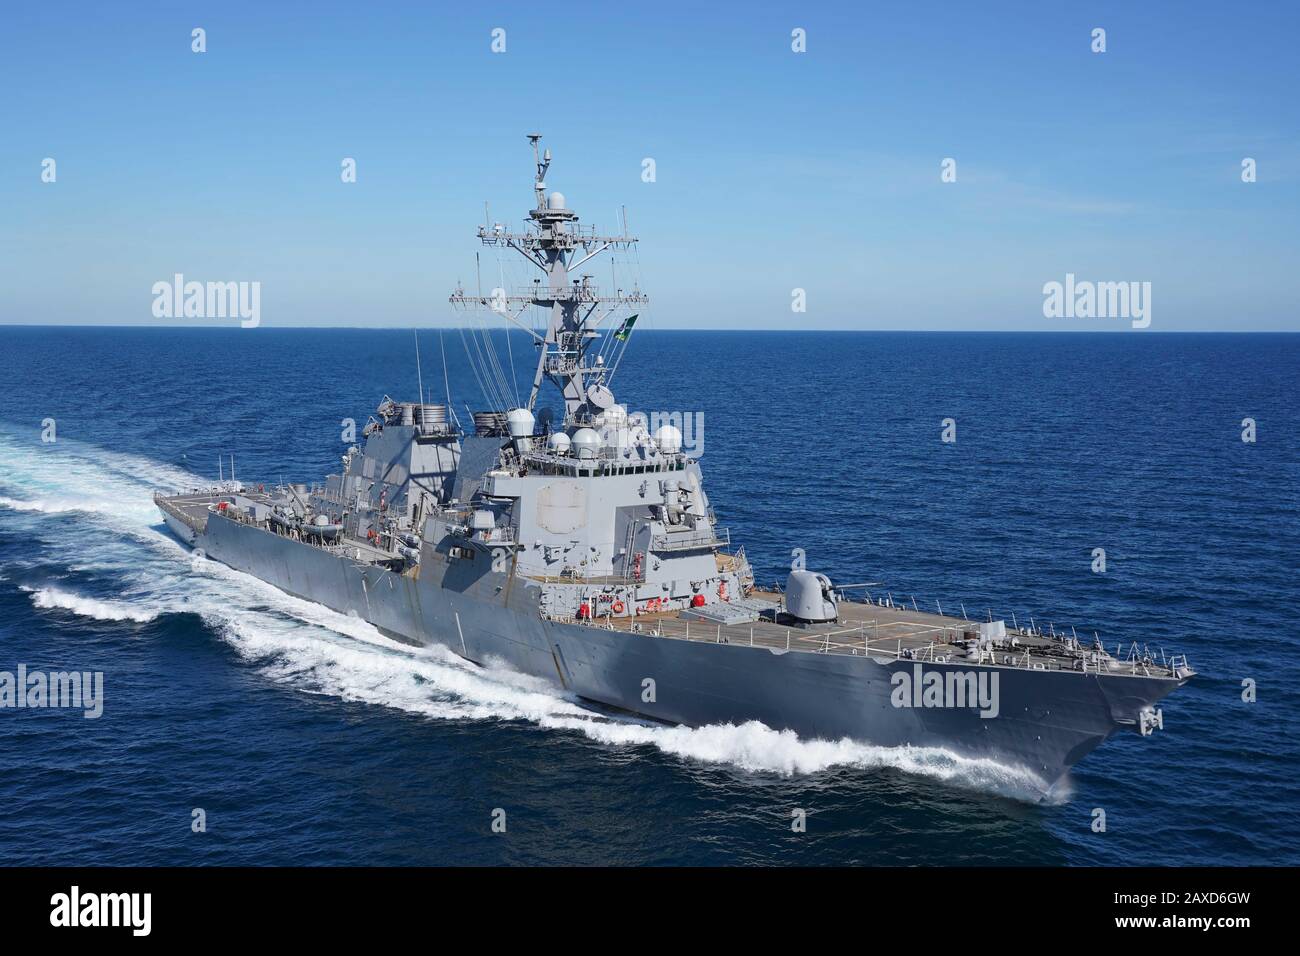 The U.S. Navy Arleigh Burke-class guided-missile destroyer USS Fitzgerald conducts sea trials in the Gulf of Mexico February 3, 2020 off the coast of Pascagoula, Mississippi, USA. The ship was severely damaged in a collision with a container ship and spent two years being repaired and upgraded. Stock Photo